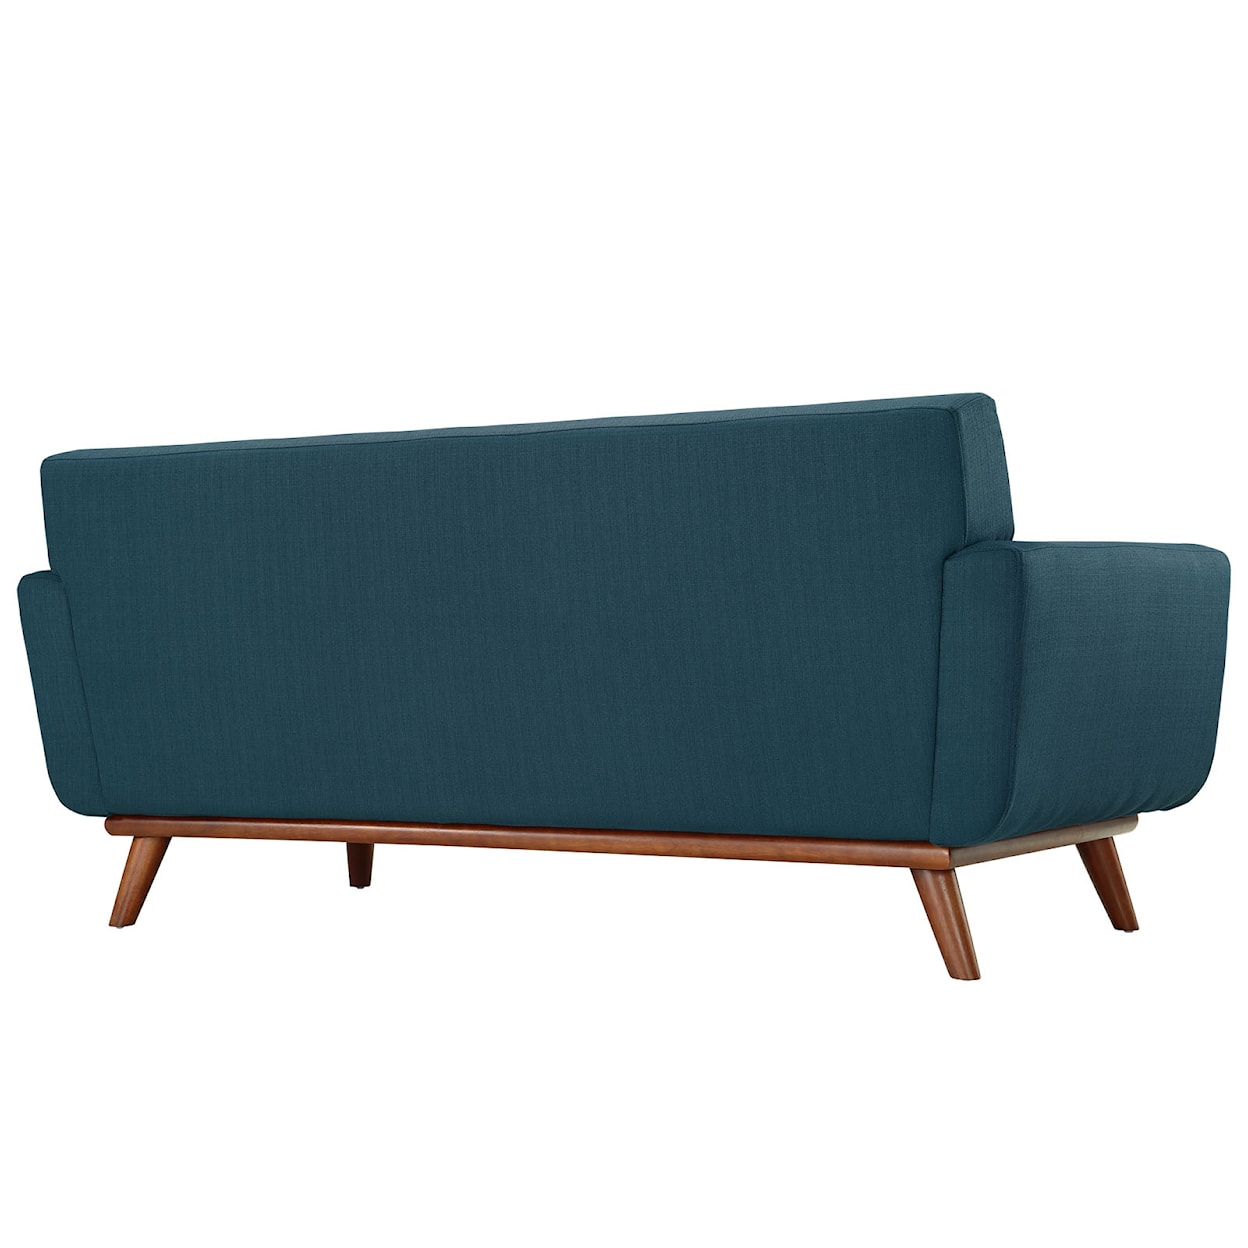 Modway Engage Armchair and Loveseat Set